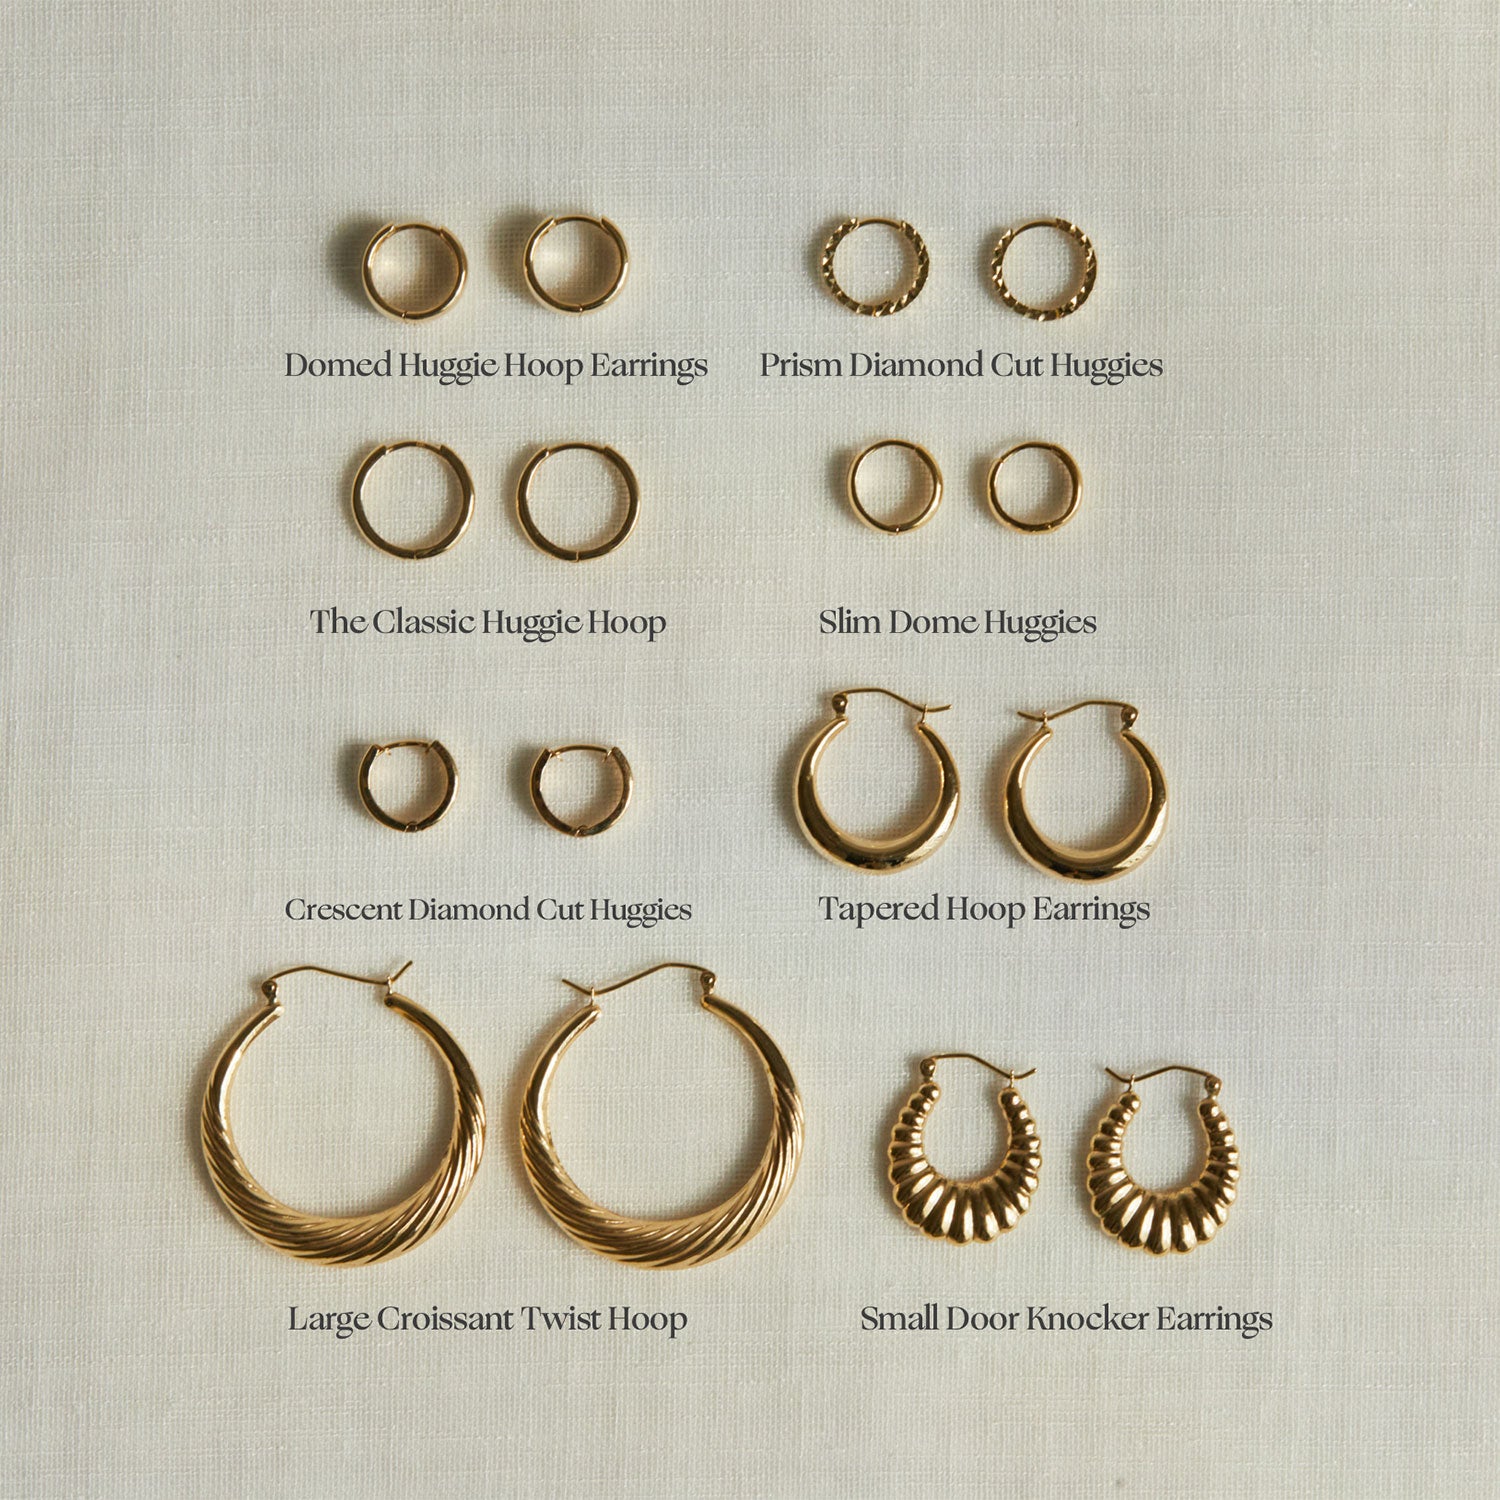 How to Wear Different Types of Earrings and look great